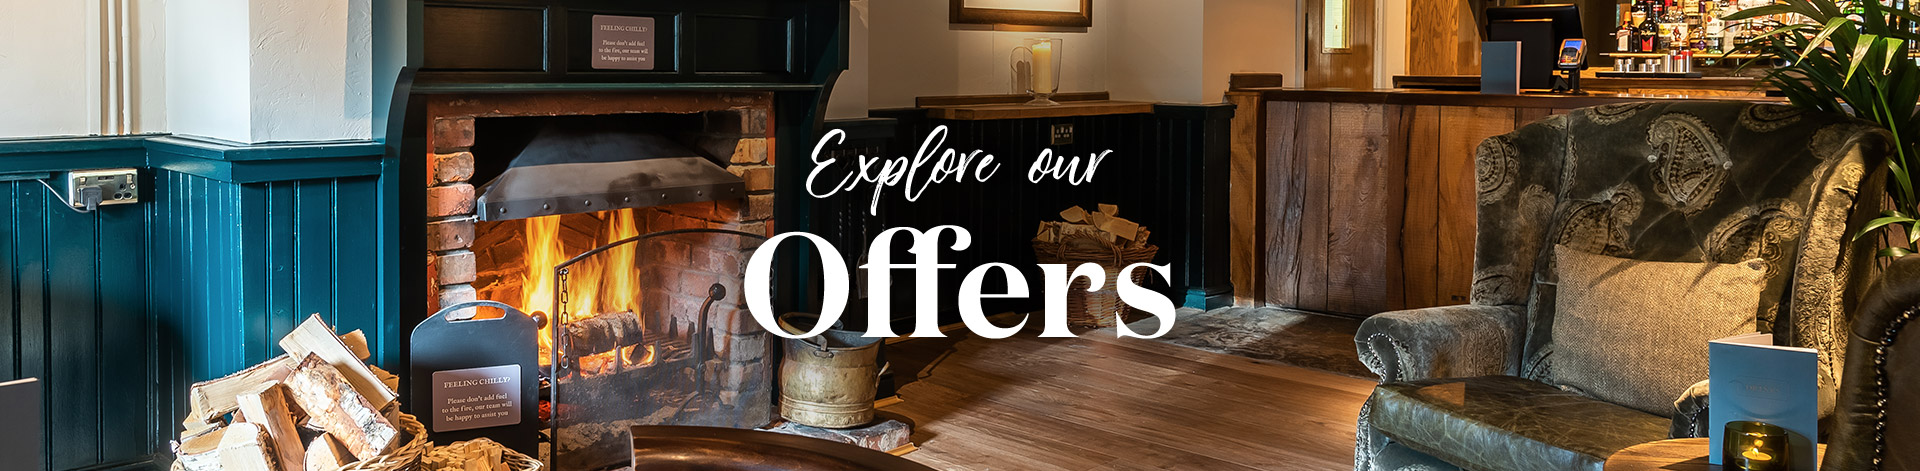 Our latest offers at The Lamb Inn